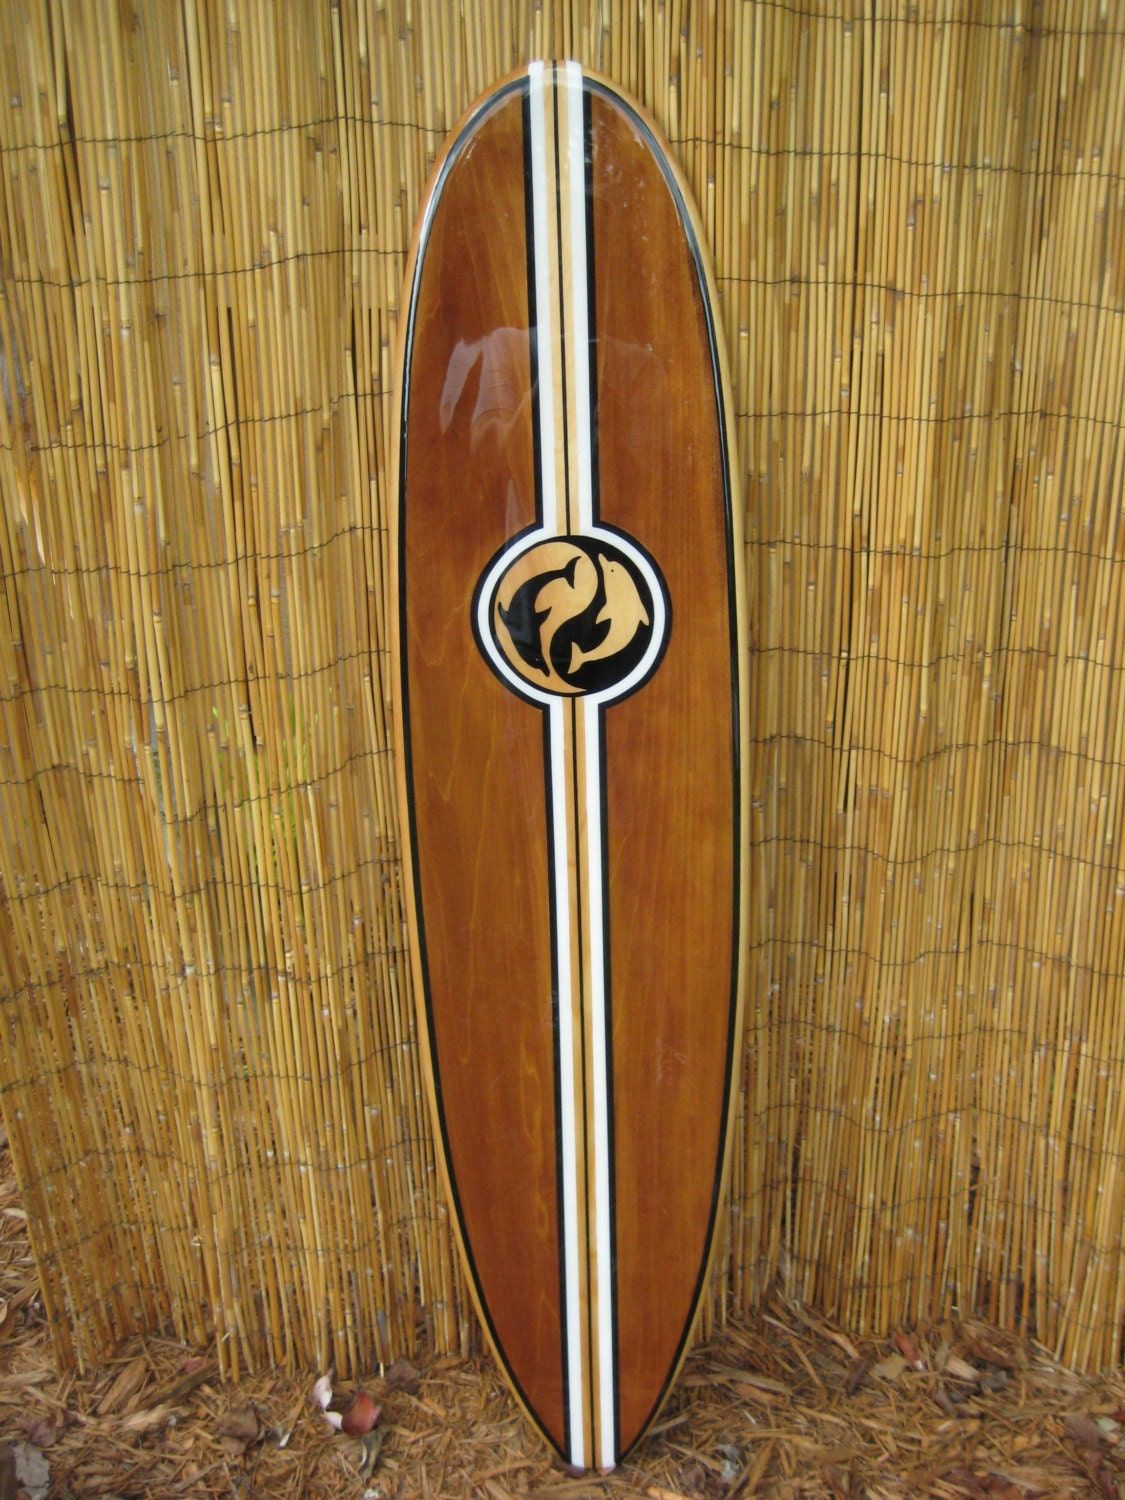 Decorative Wooden Surfboard Wall Art For A Hotel Restaurant With Surfing Wall Art (View 4 of 15)